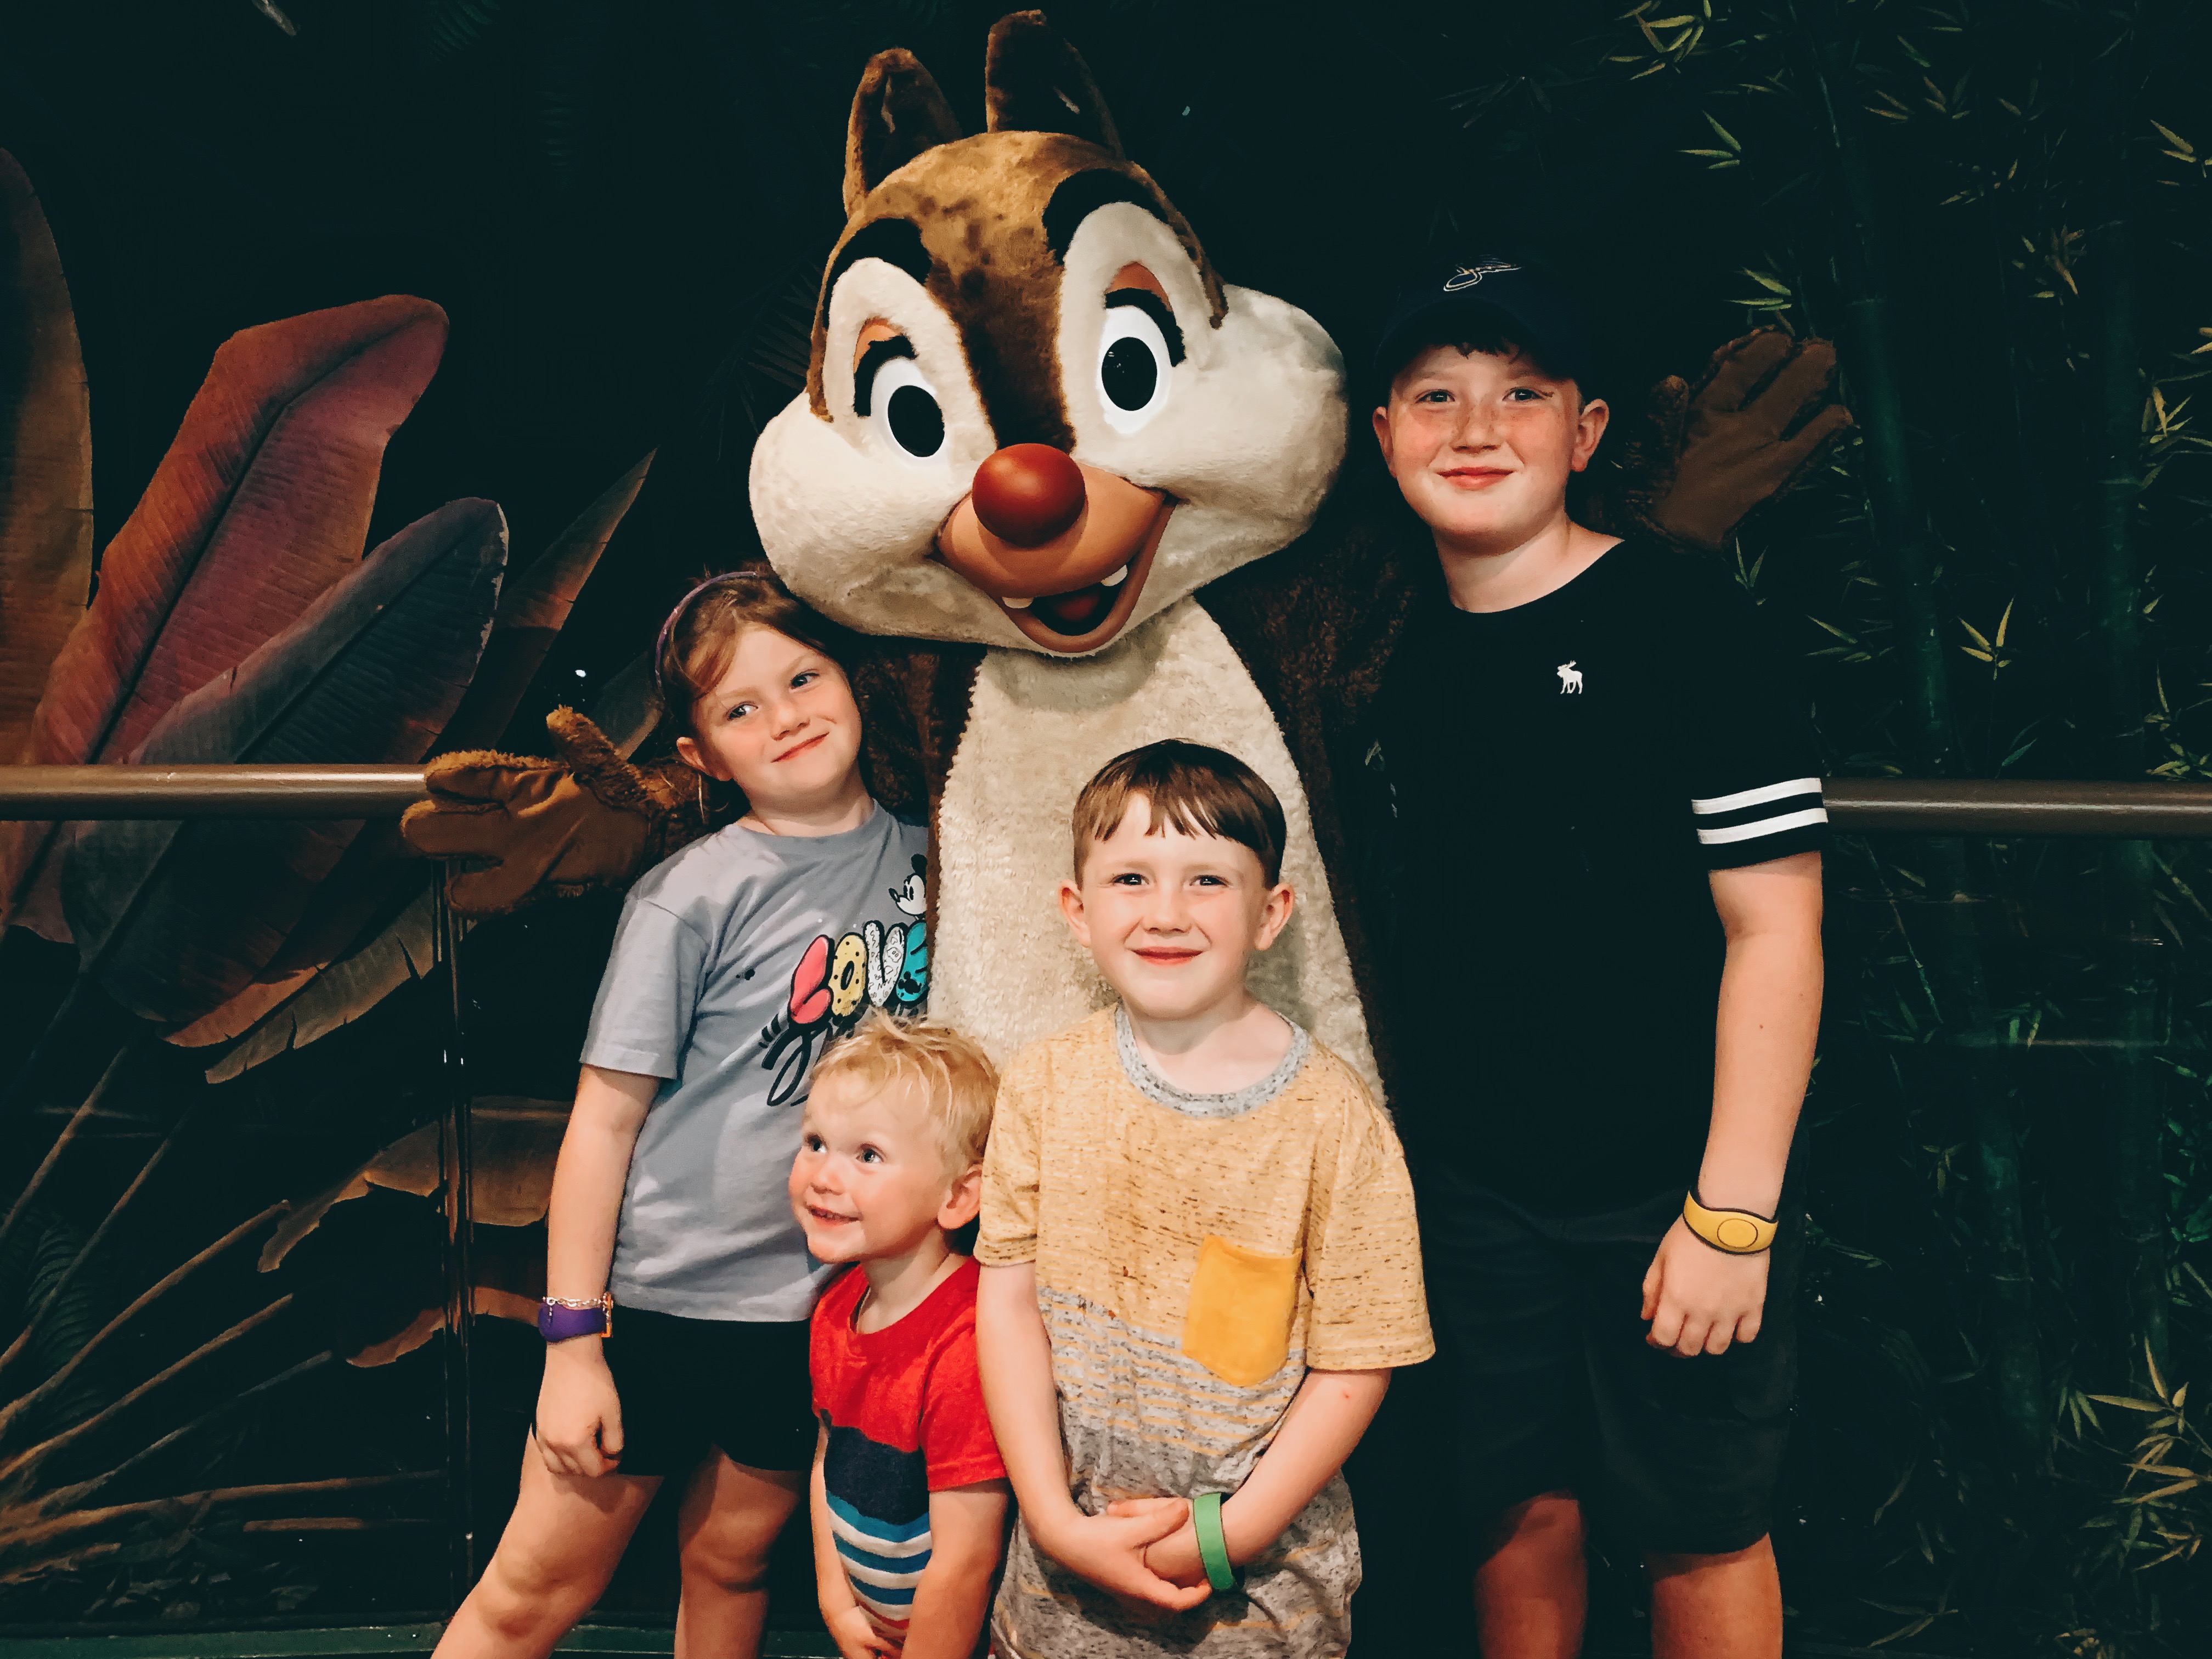 Take magical pictures at Walt Disney World with your phone!